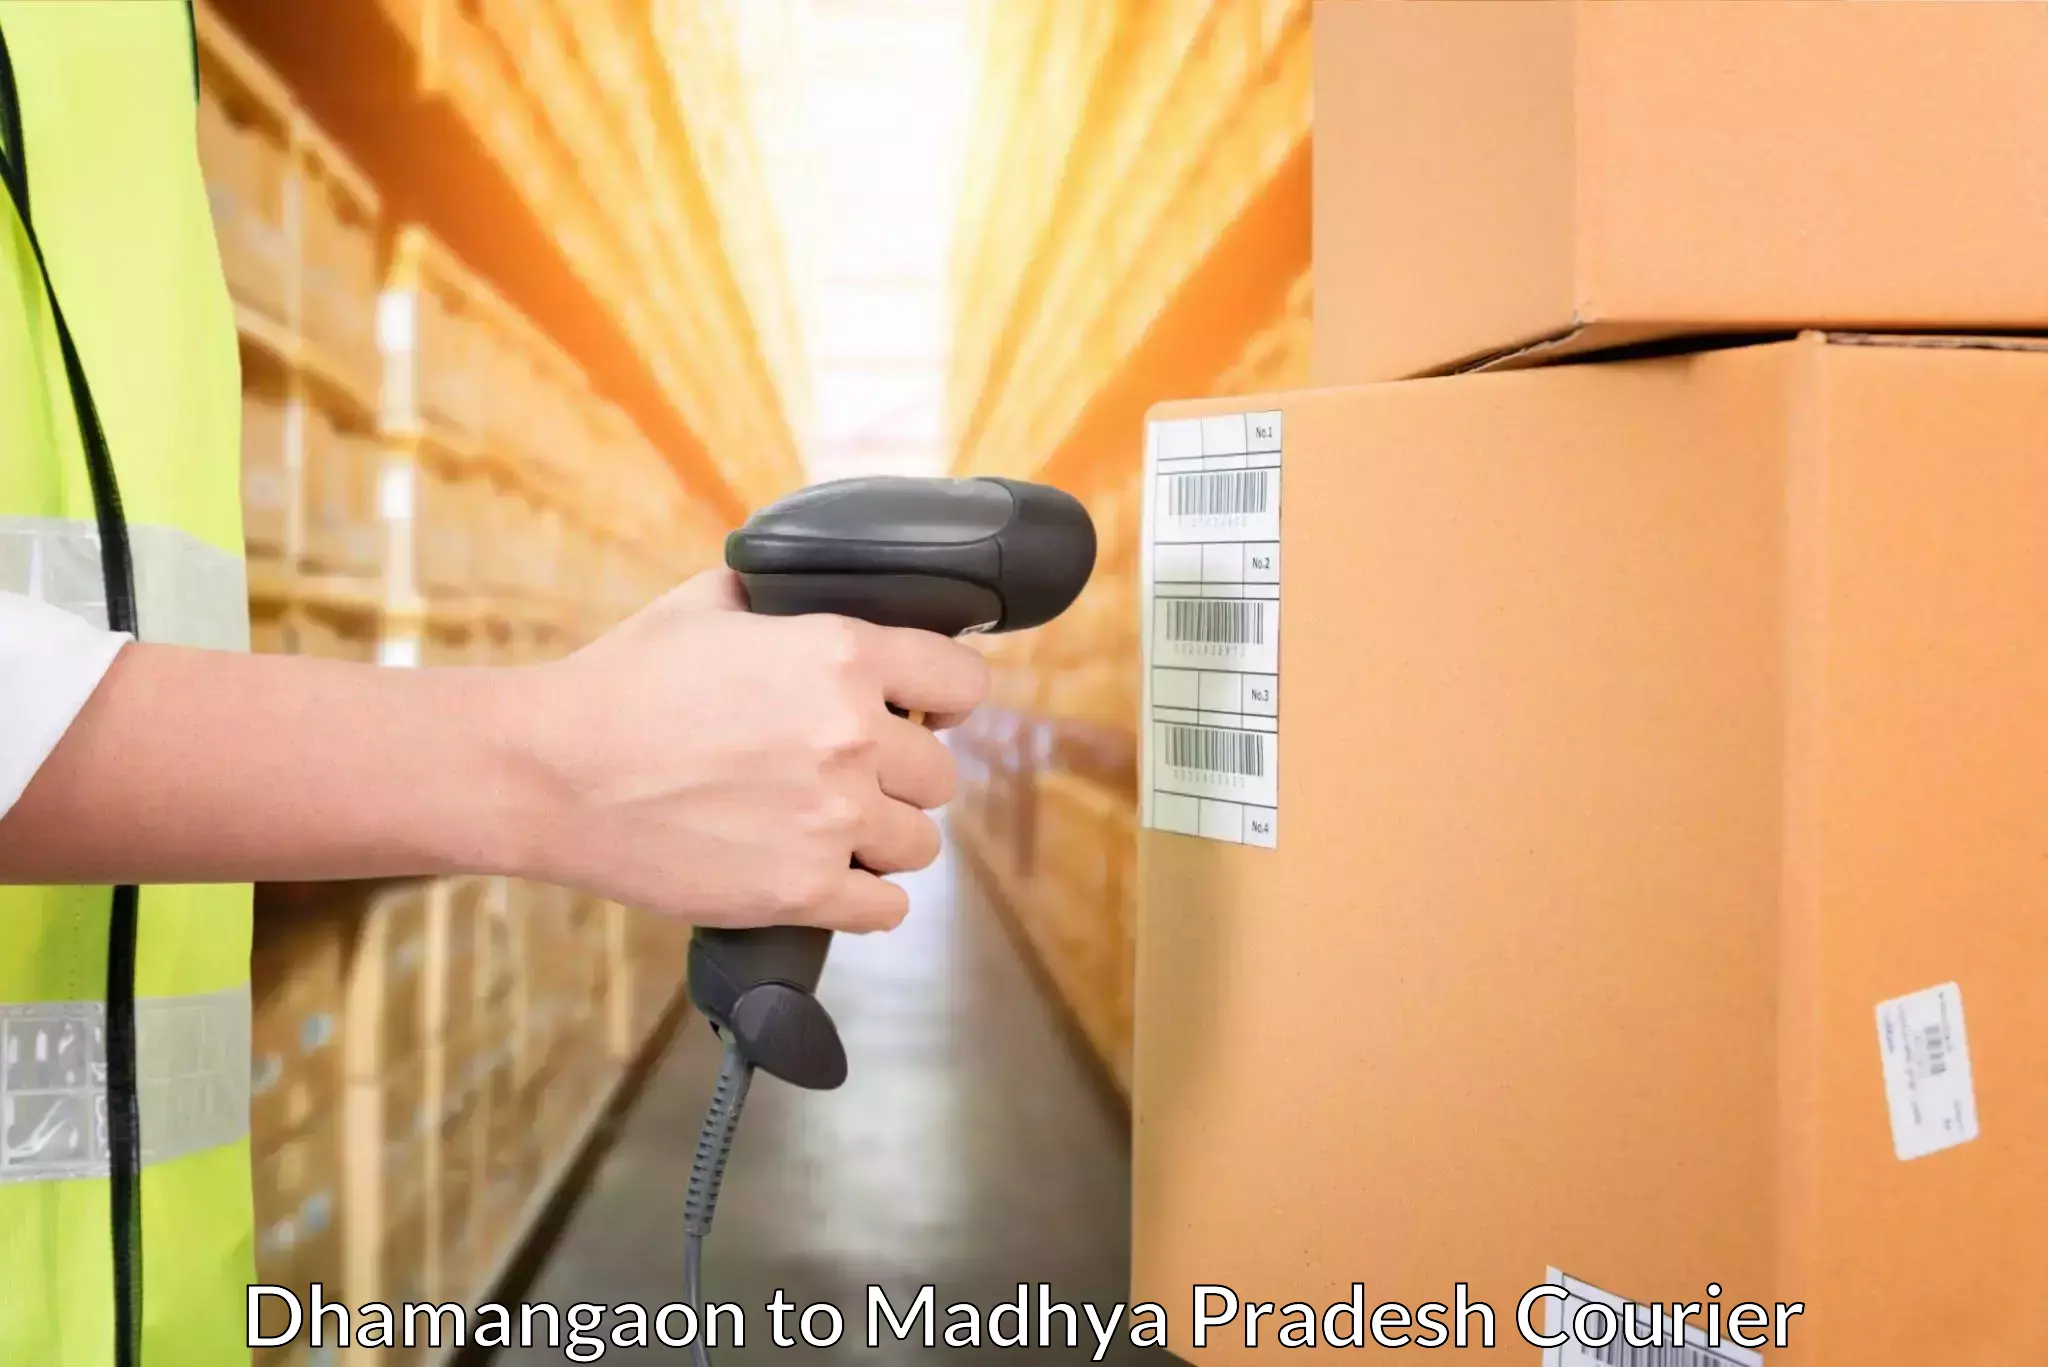 Personalized courier experiences Dhamangaon to Sidhi